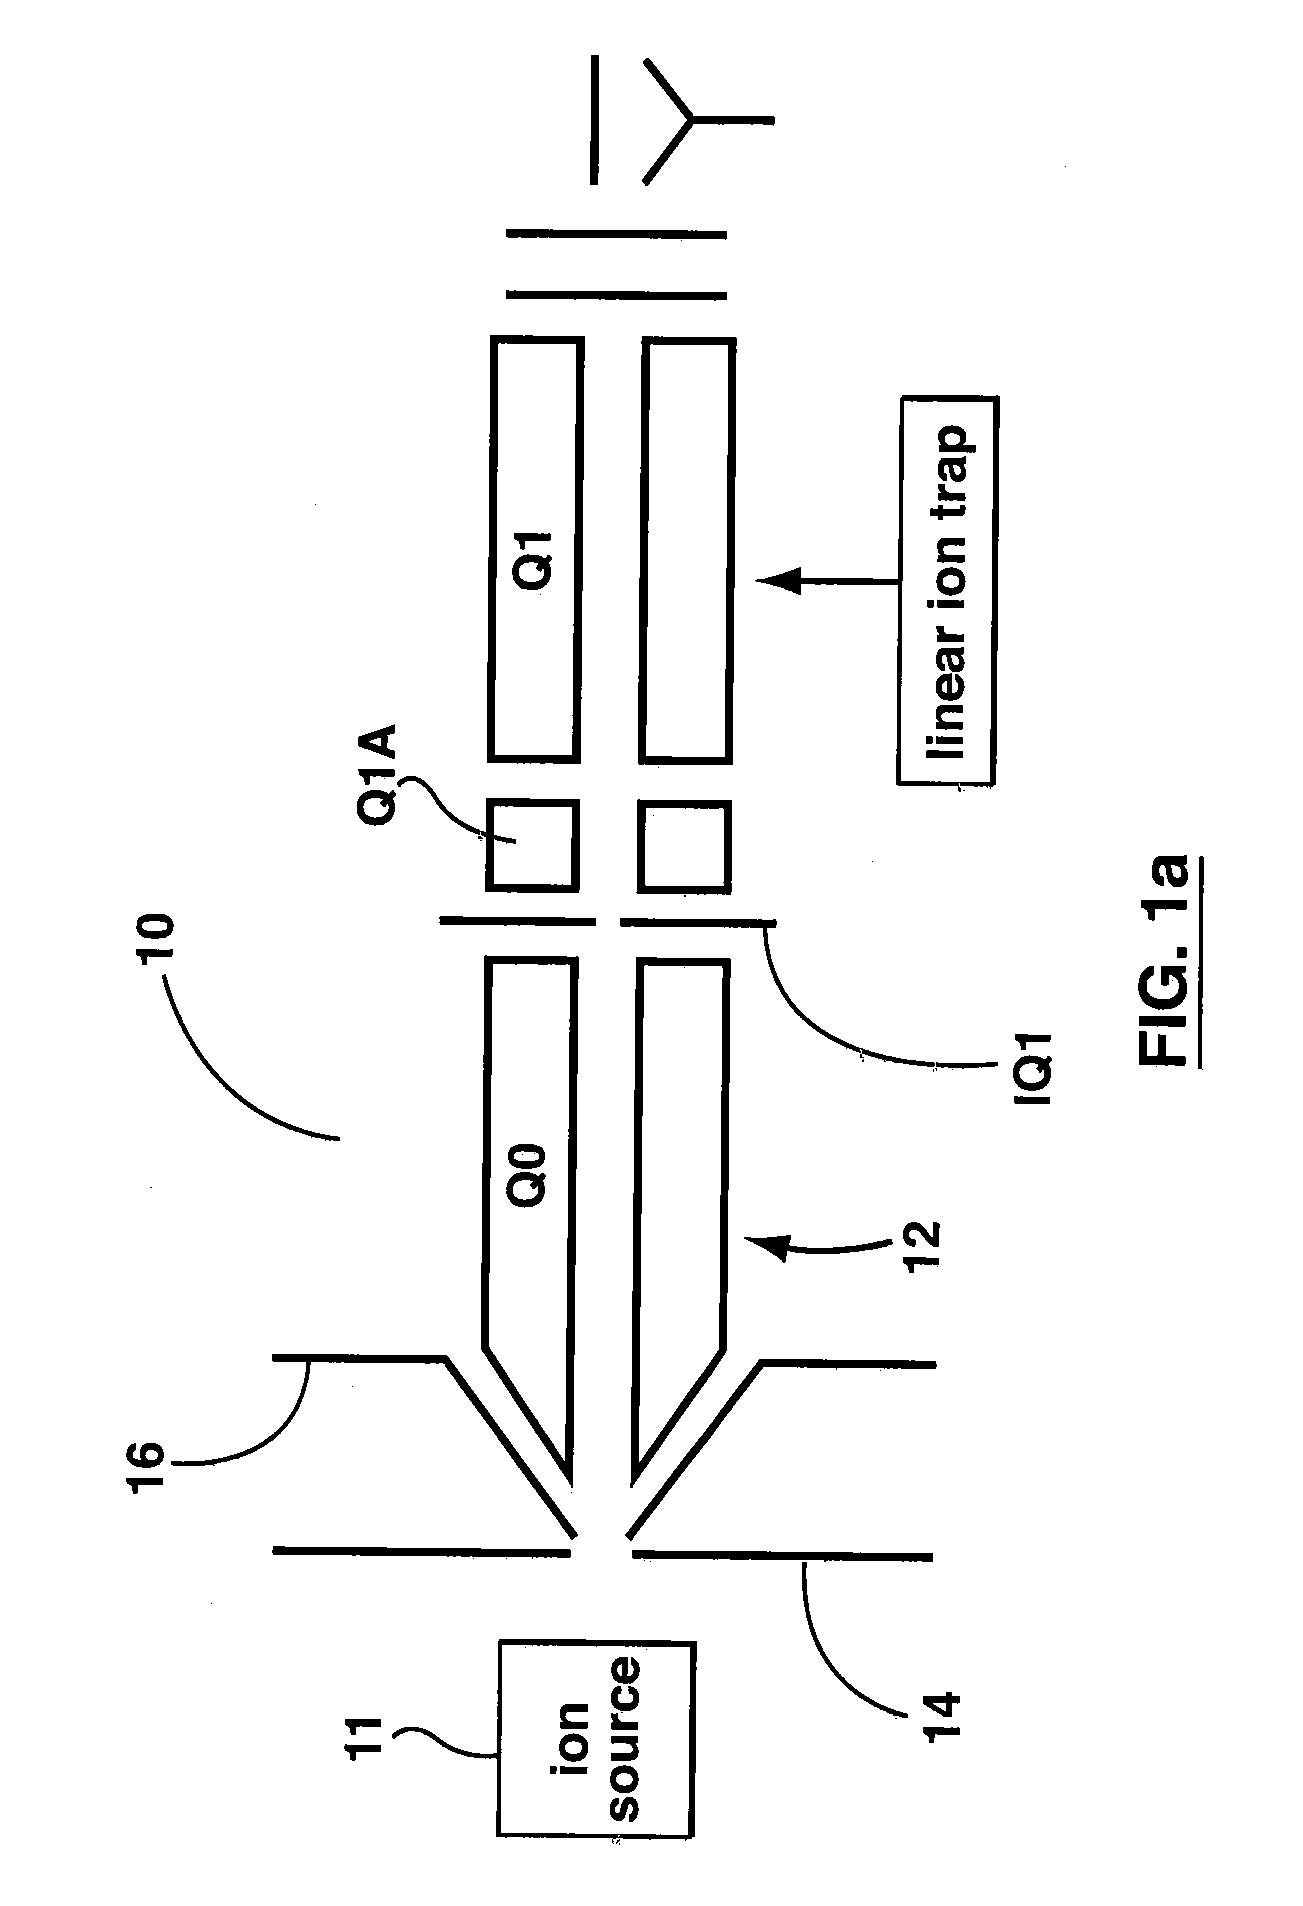 Method of operating a linear ion trap to provide low pressure short time high amplitude excitation with pulsed pressure